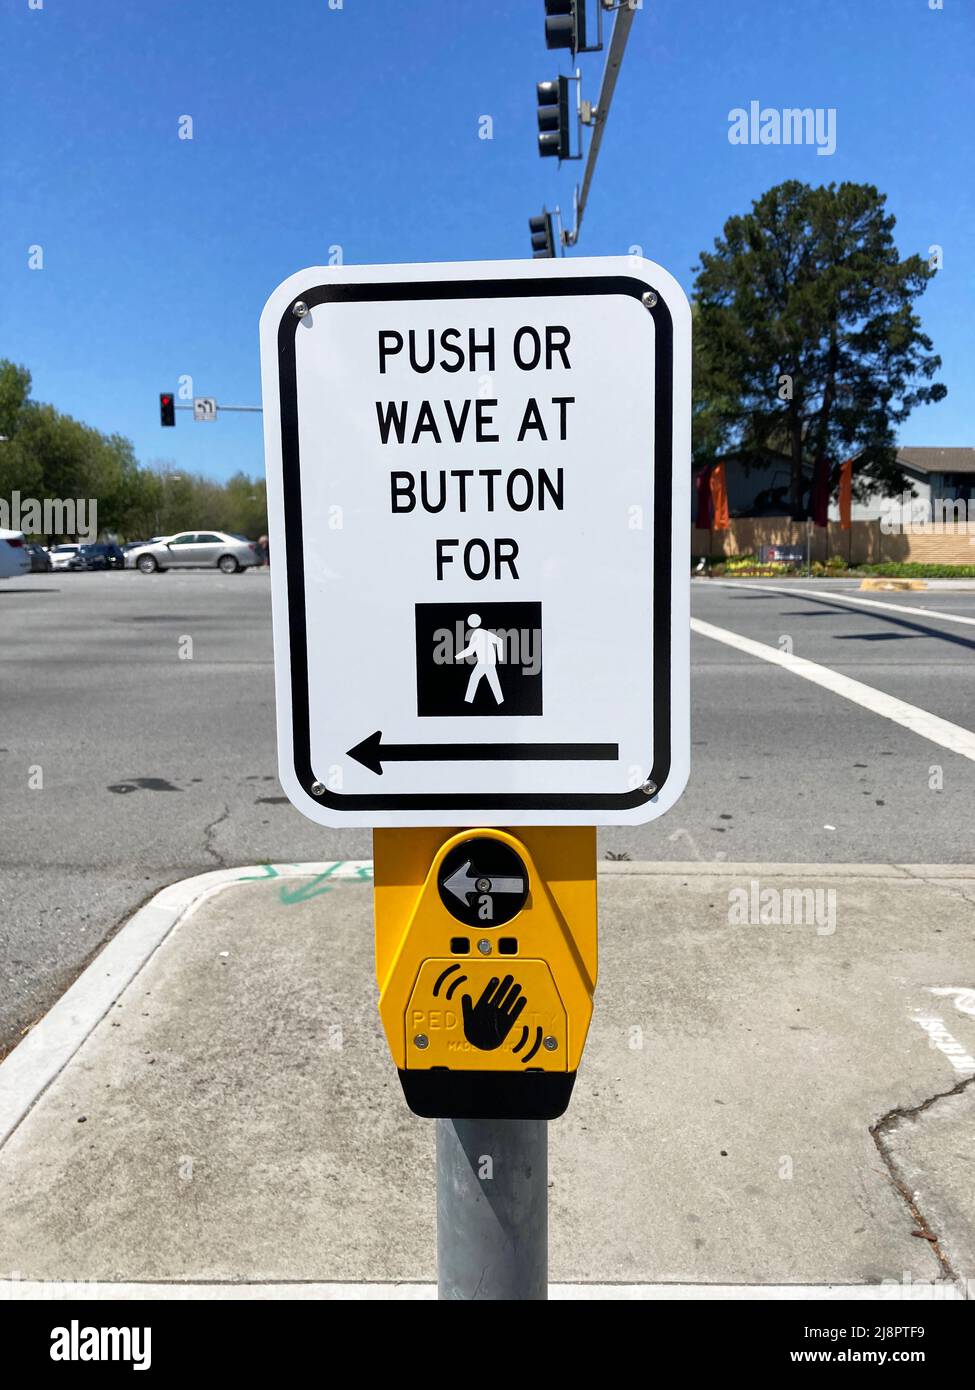 Pedestrian crosswalk, Push or Wave At Button, installed at traffic lights with a dedicated pedestrian signal Stock Photo